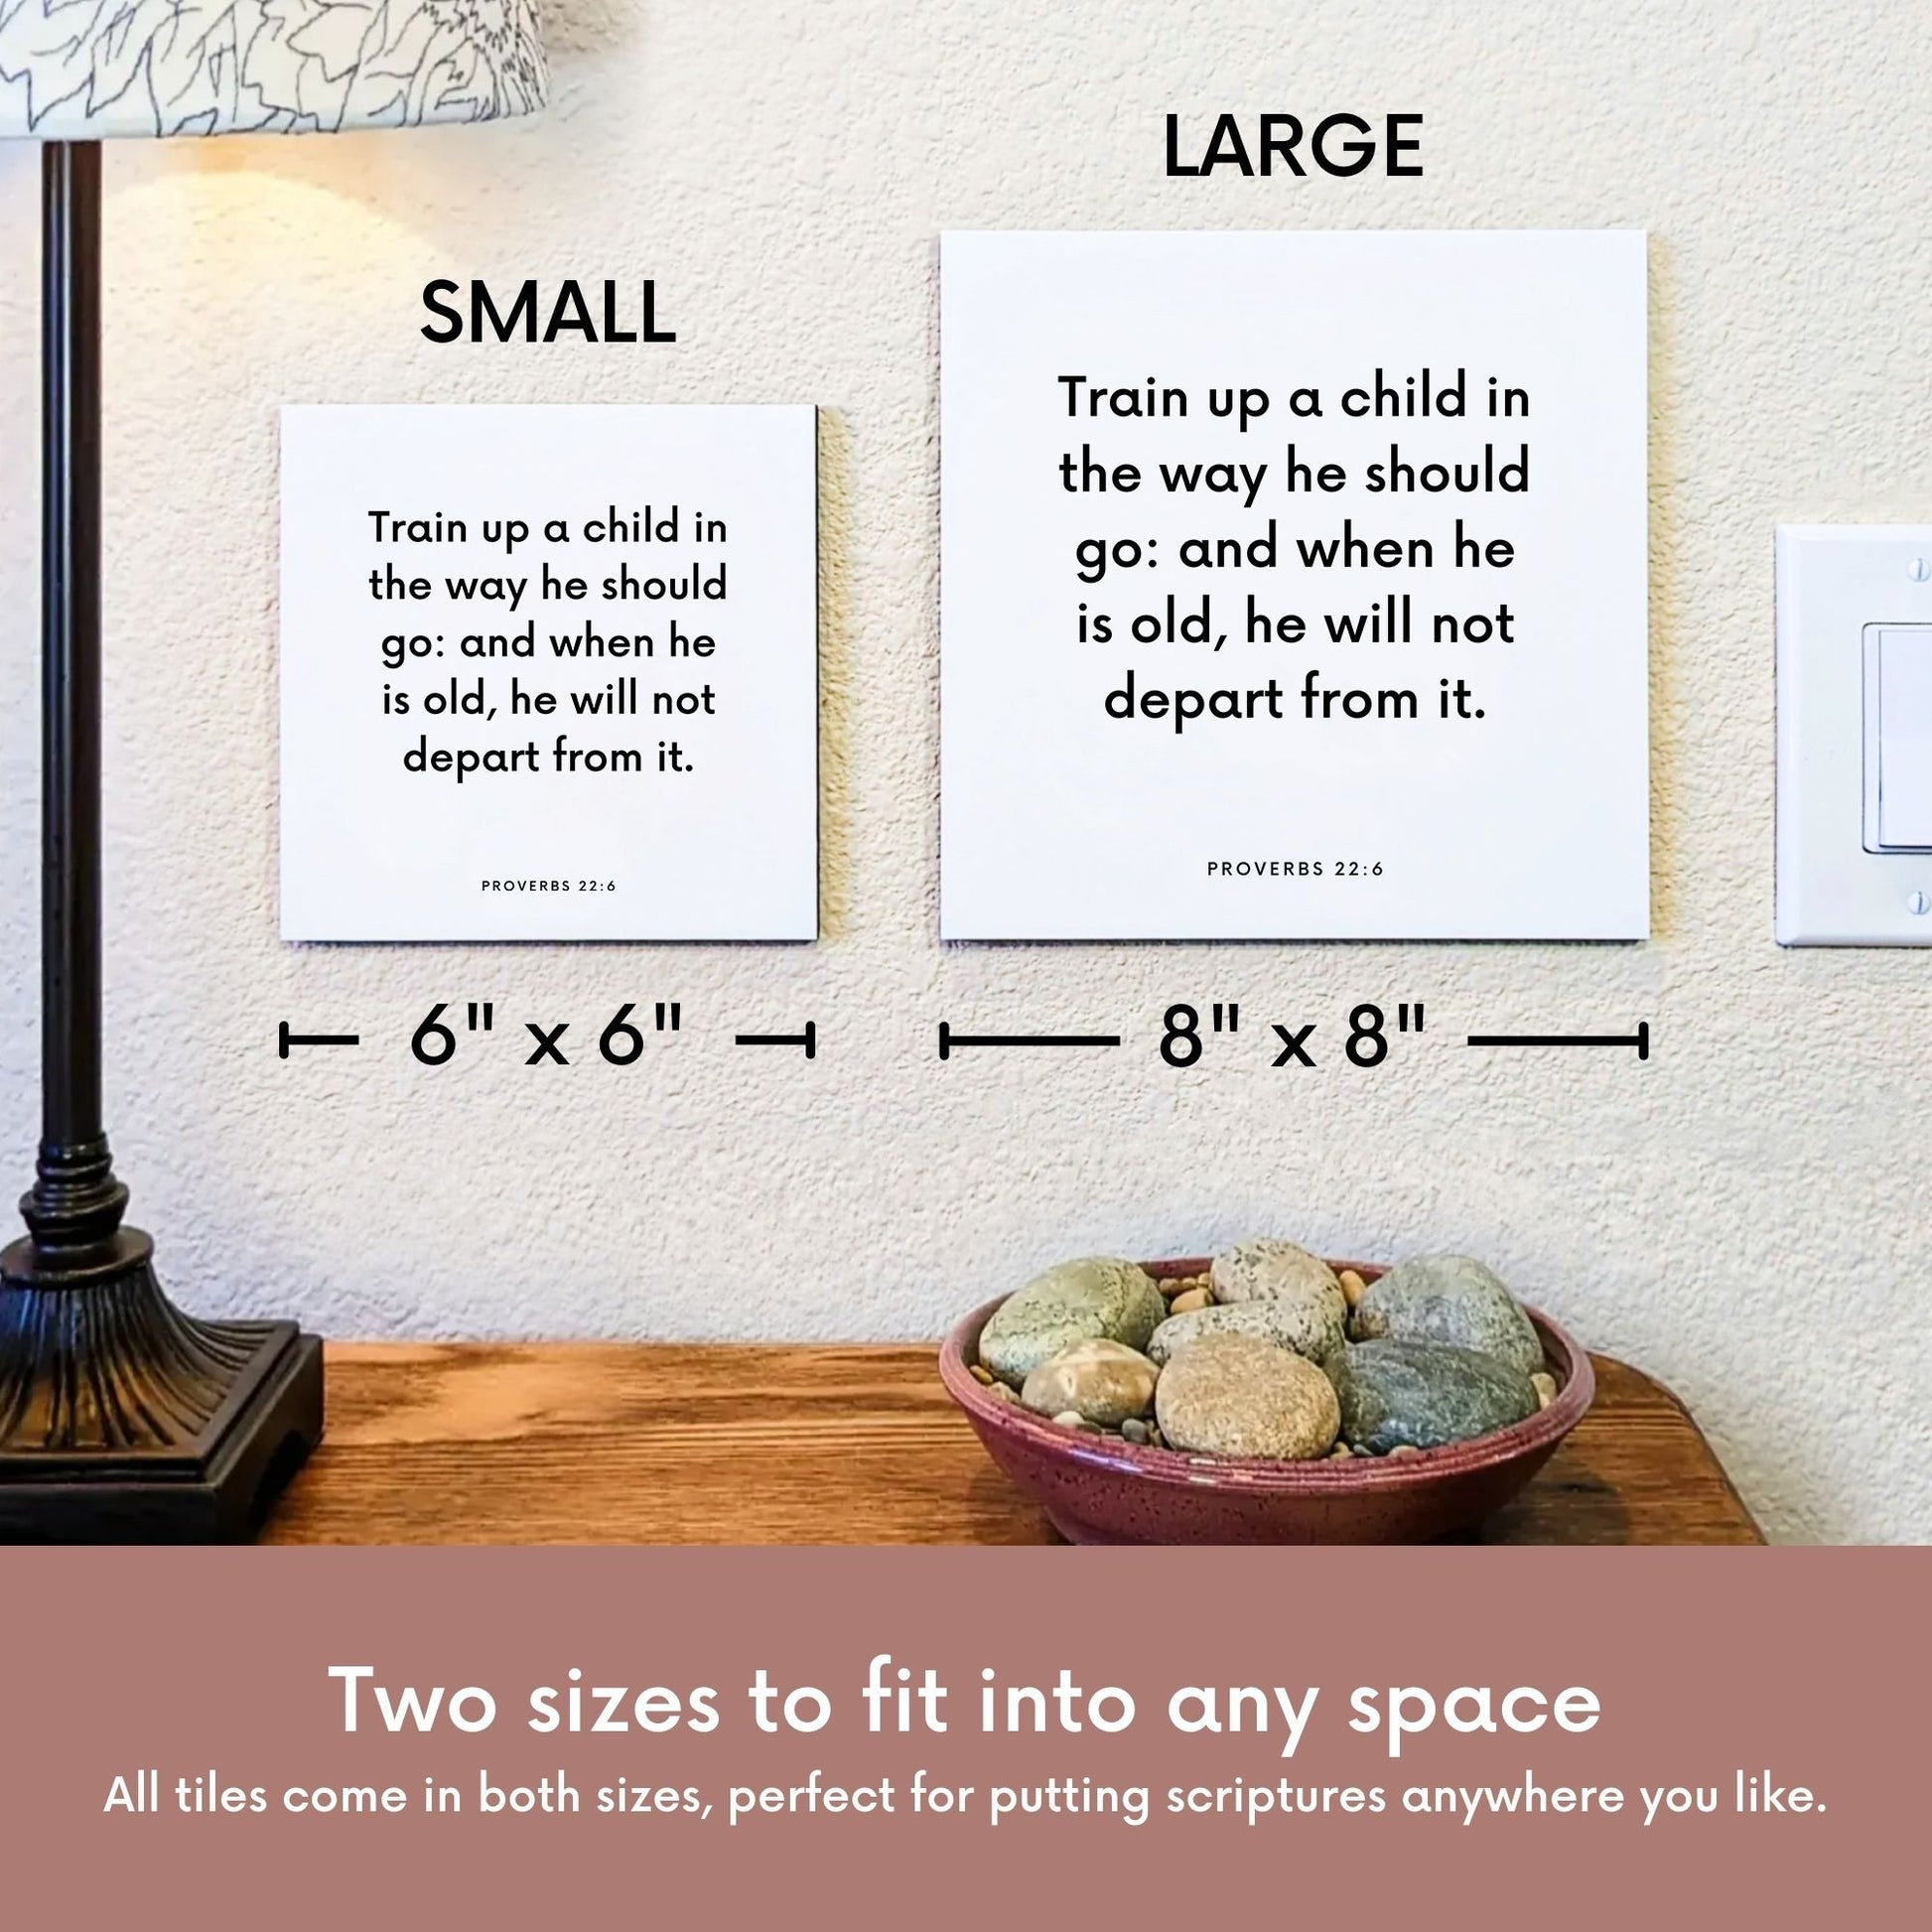 Scripture tile size comparison for Proverbs 22:6 - "Train up a child in the way he should go"